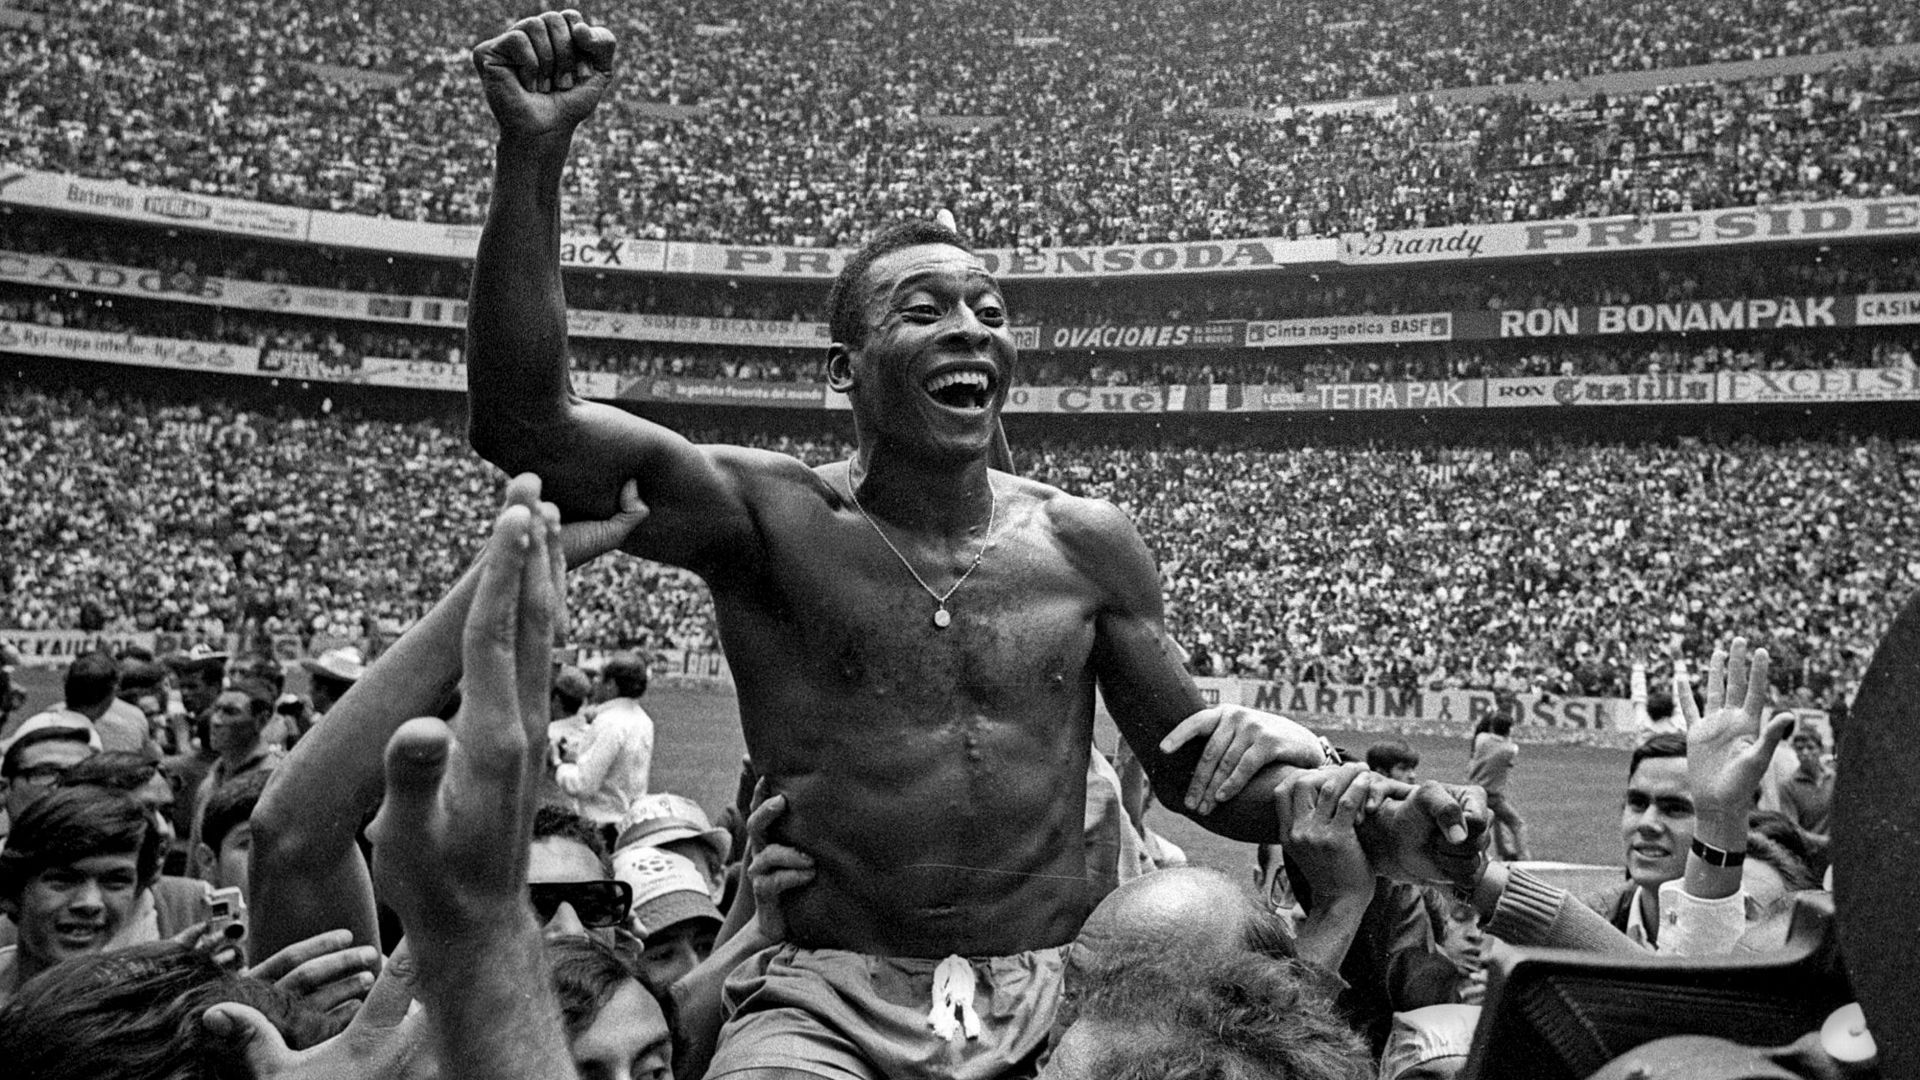 Pele (pic cred: Financial Times)